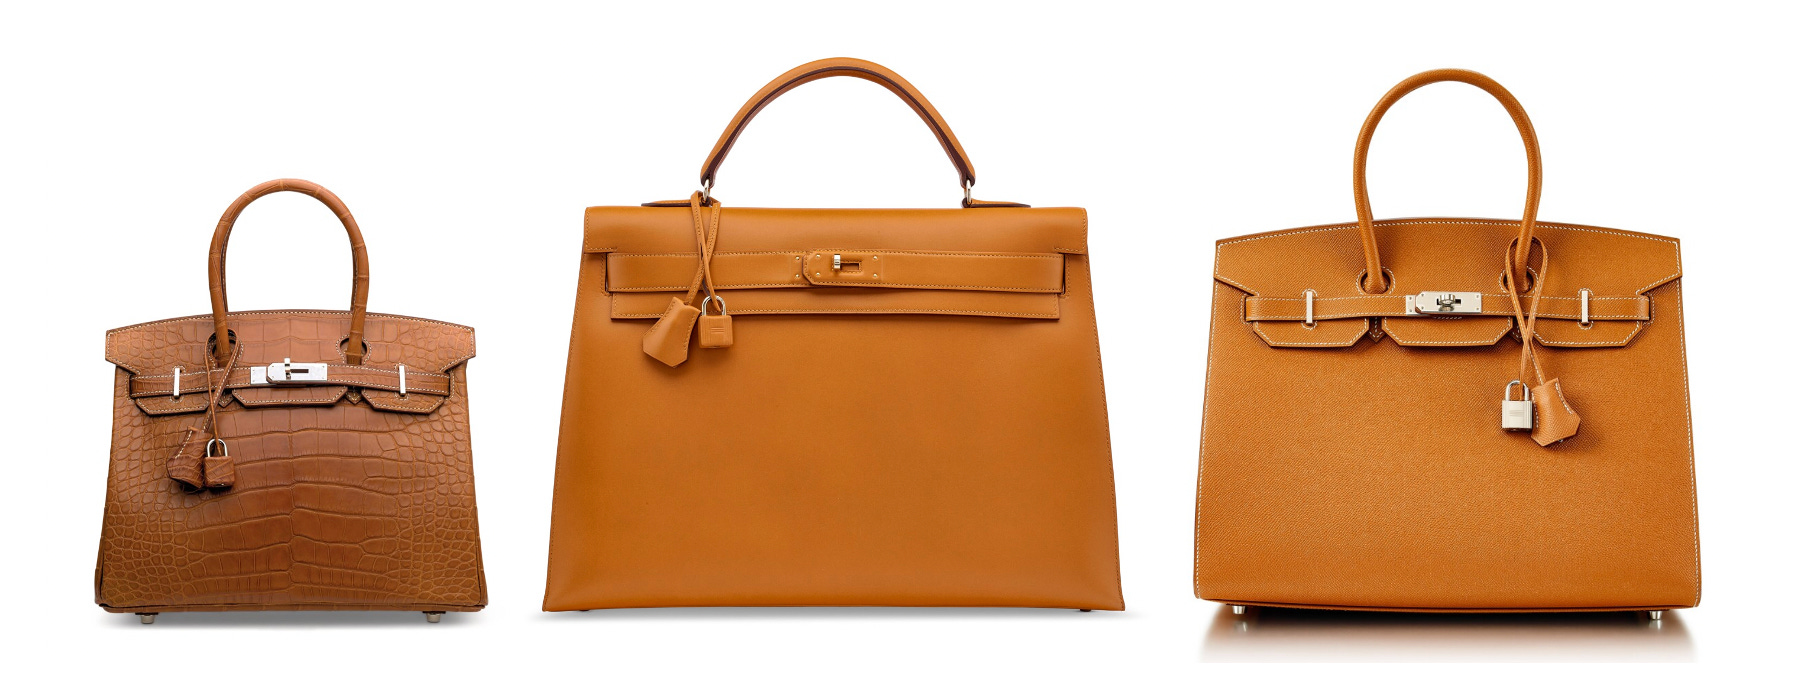 Birkin bags hit record prices even as the world ground to a halt during  COVID-19